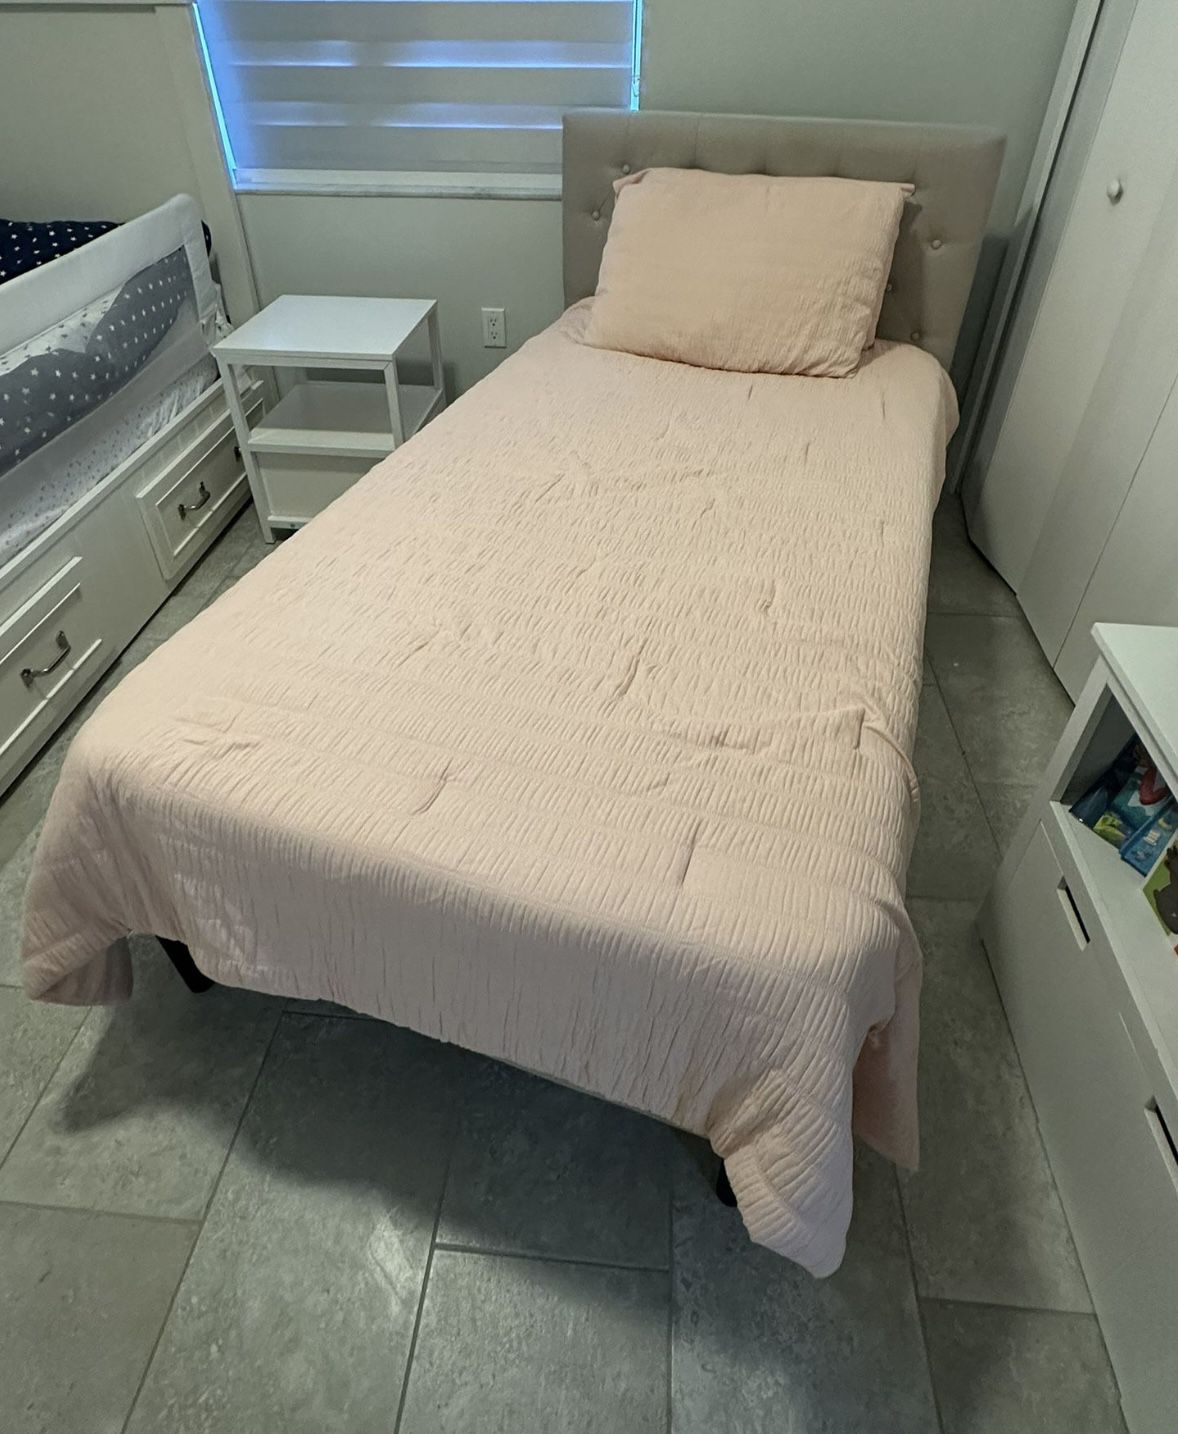 Full Twin Bed With Mattress